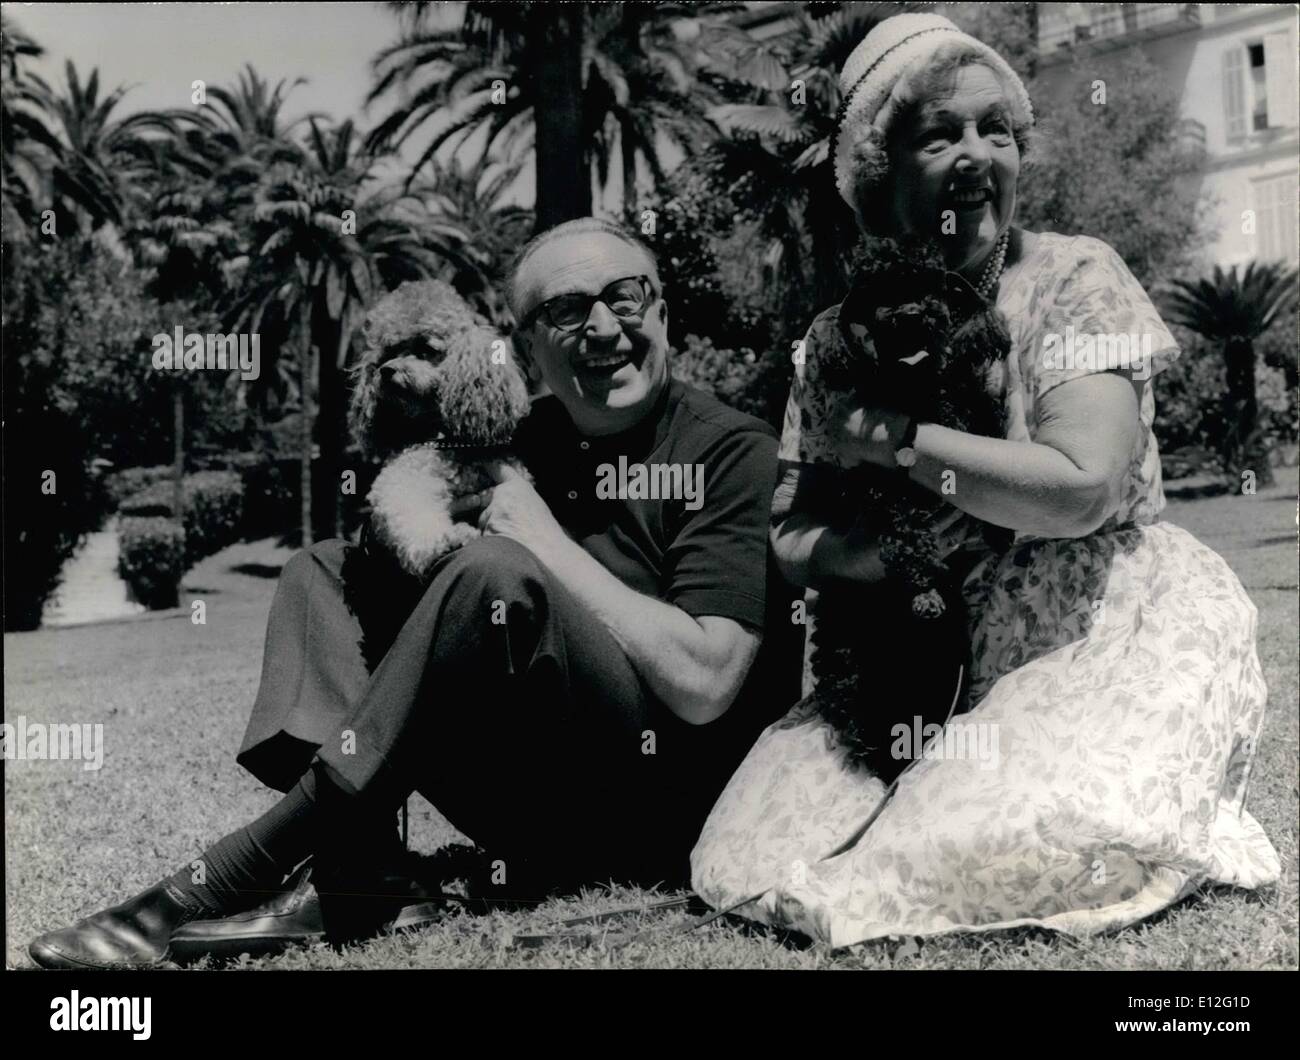 Dec. 26, 2011 - Harold Lloyd in Cannes - Harold Llyoyd Famous Coemdian of the Silent Movies is spending his Summer Vacations with his family in Cannes. OPS Harold LLoyd and His wife Mildred in Cannes with their pet-poodles ''Pierre'' and Peppi' Stock Photo